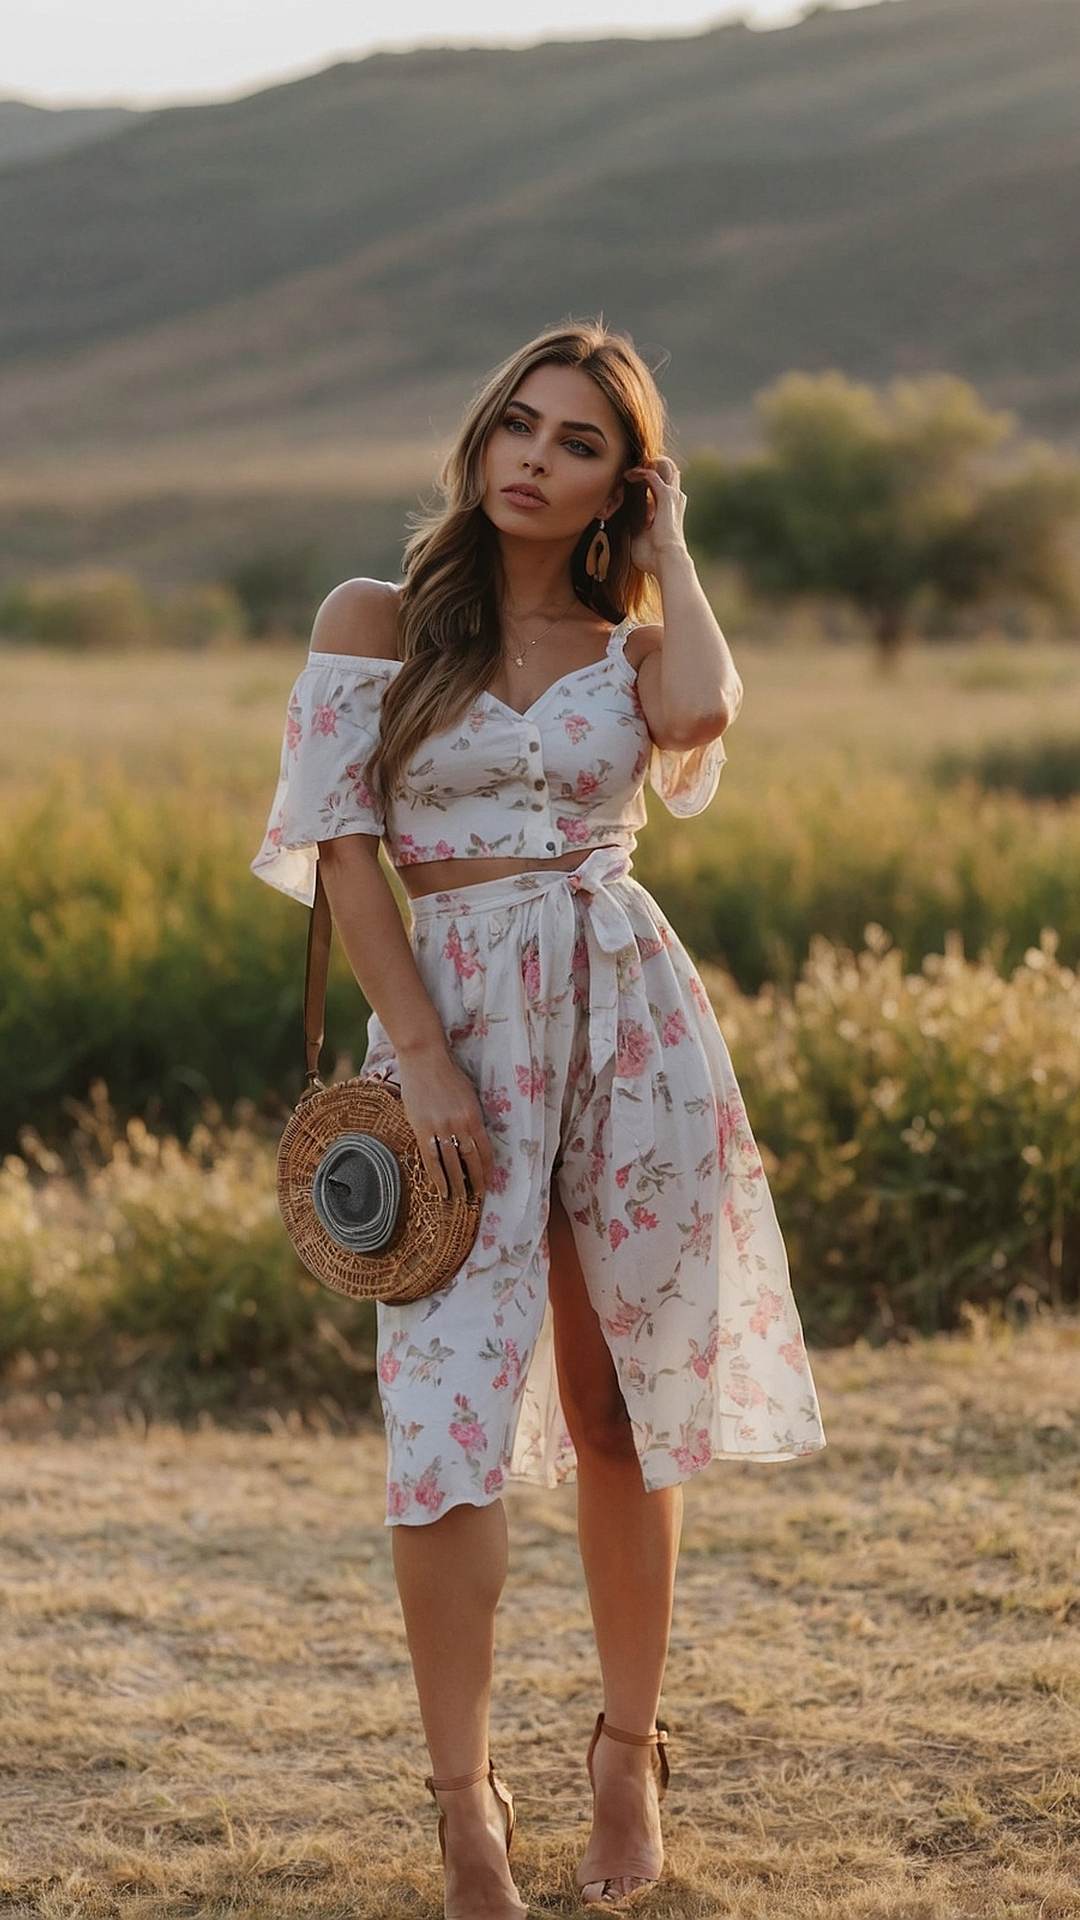 Everyday Chic: Women's Casual Picnic Outfit Ideas